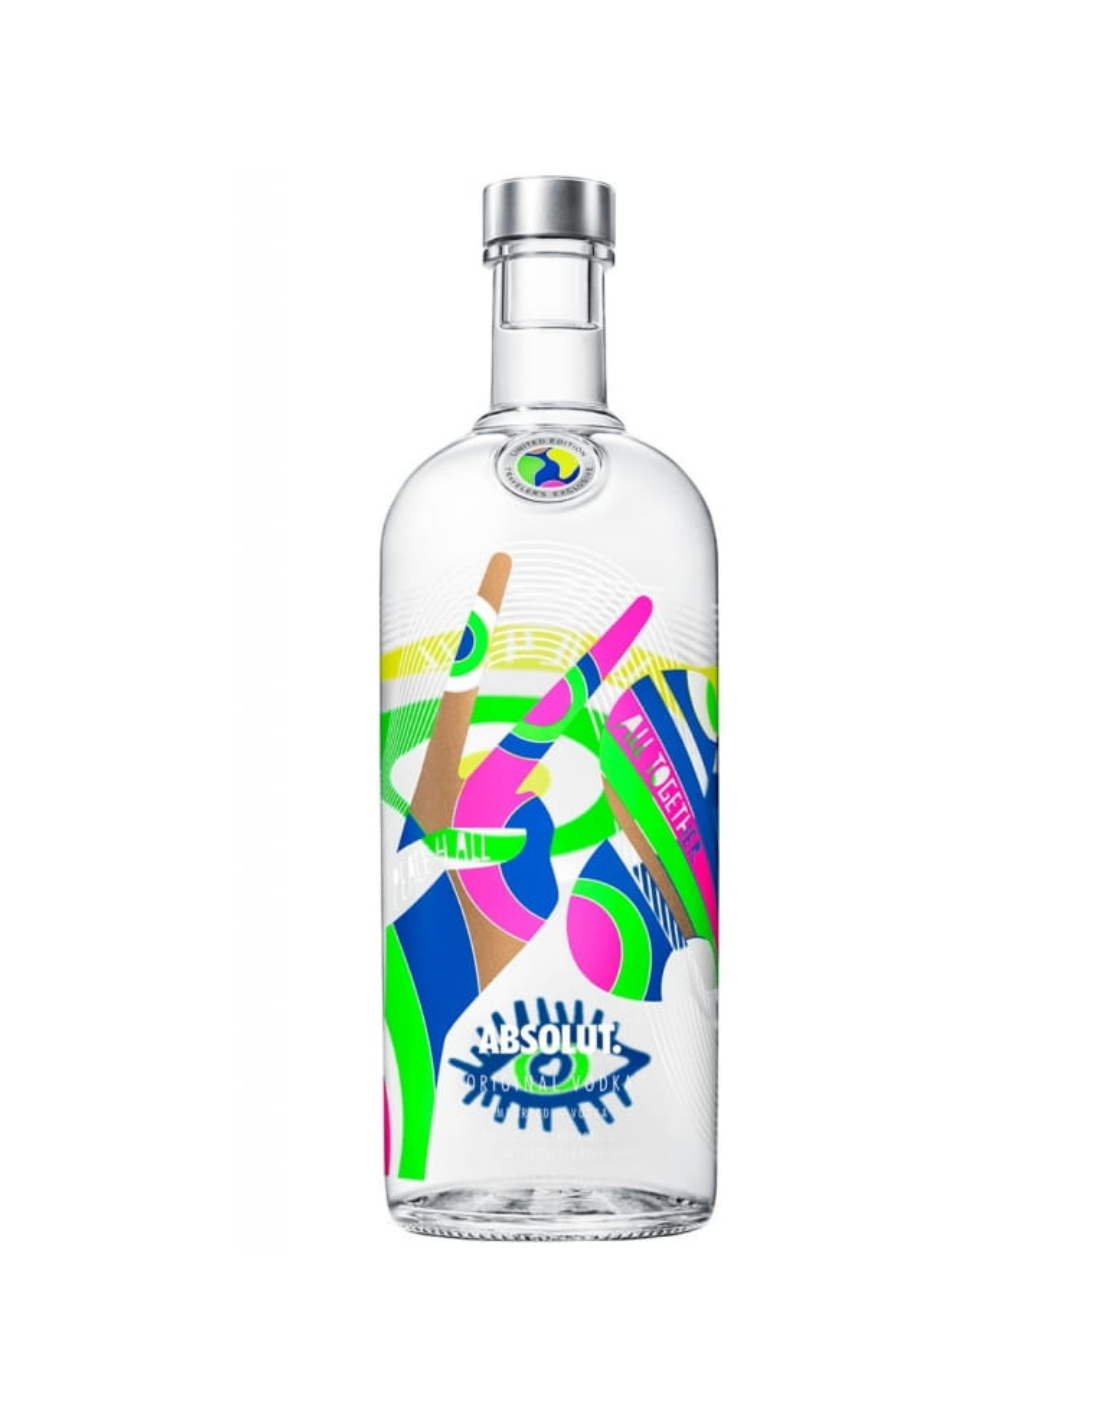 Vodca Absolut Unity Limited Edition, 1L, 40% alc., Suedia alcooldiscount.ro